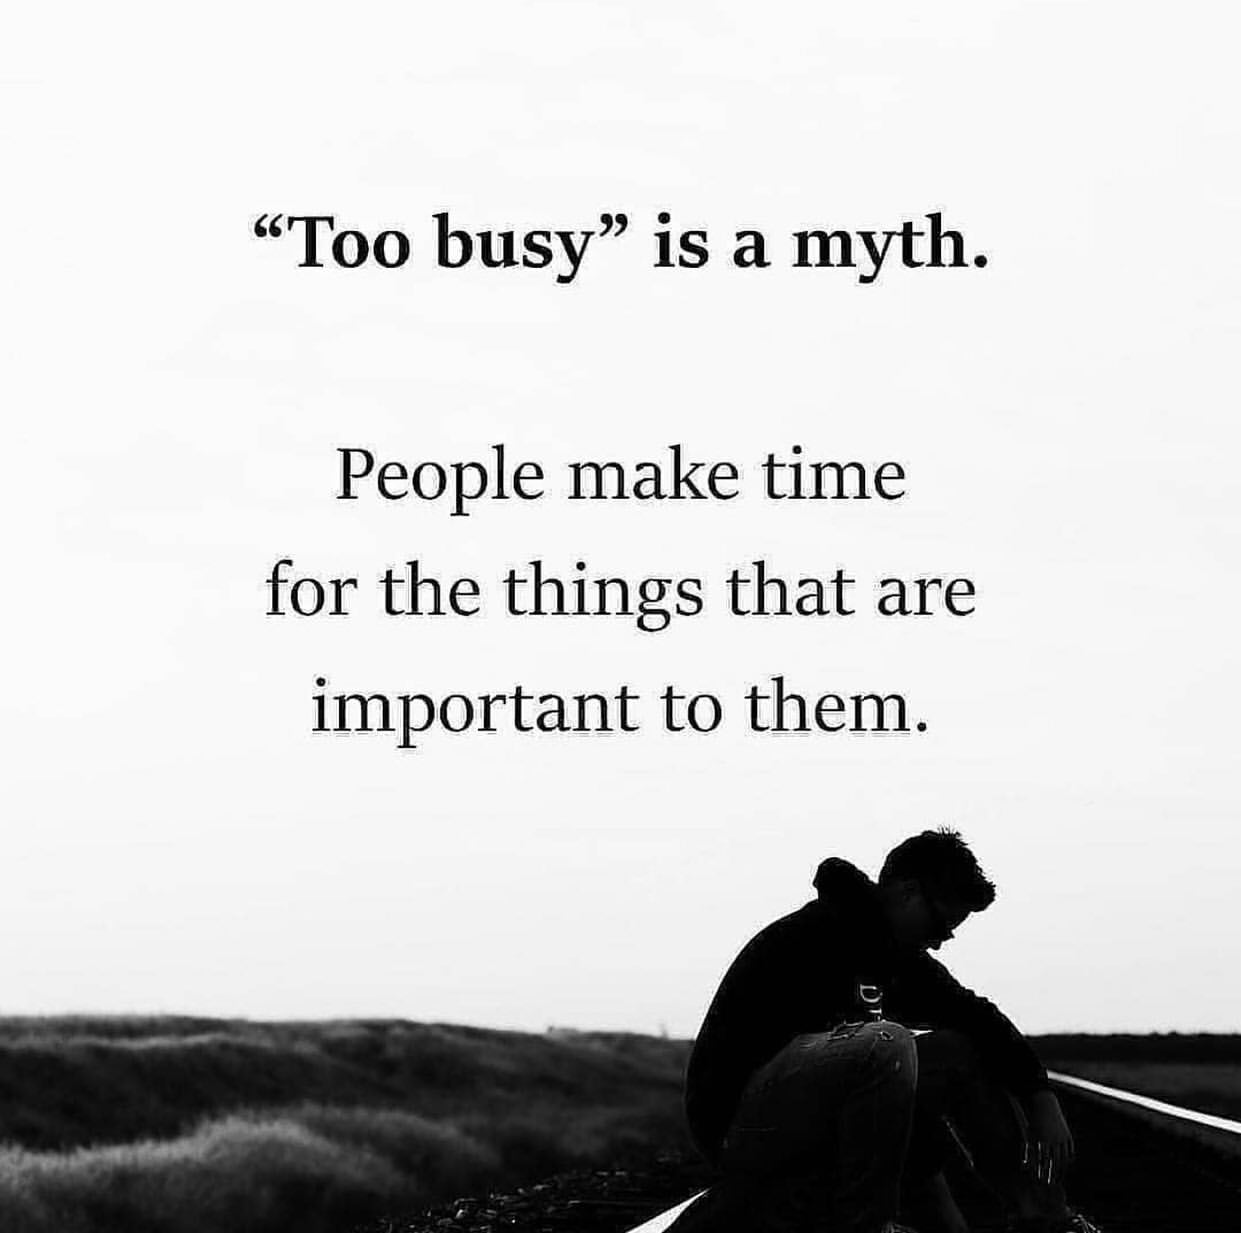 "Too busy" is a myth. People make time for the things that are important to them.